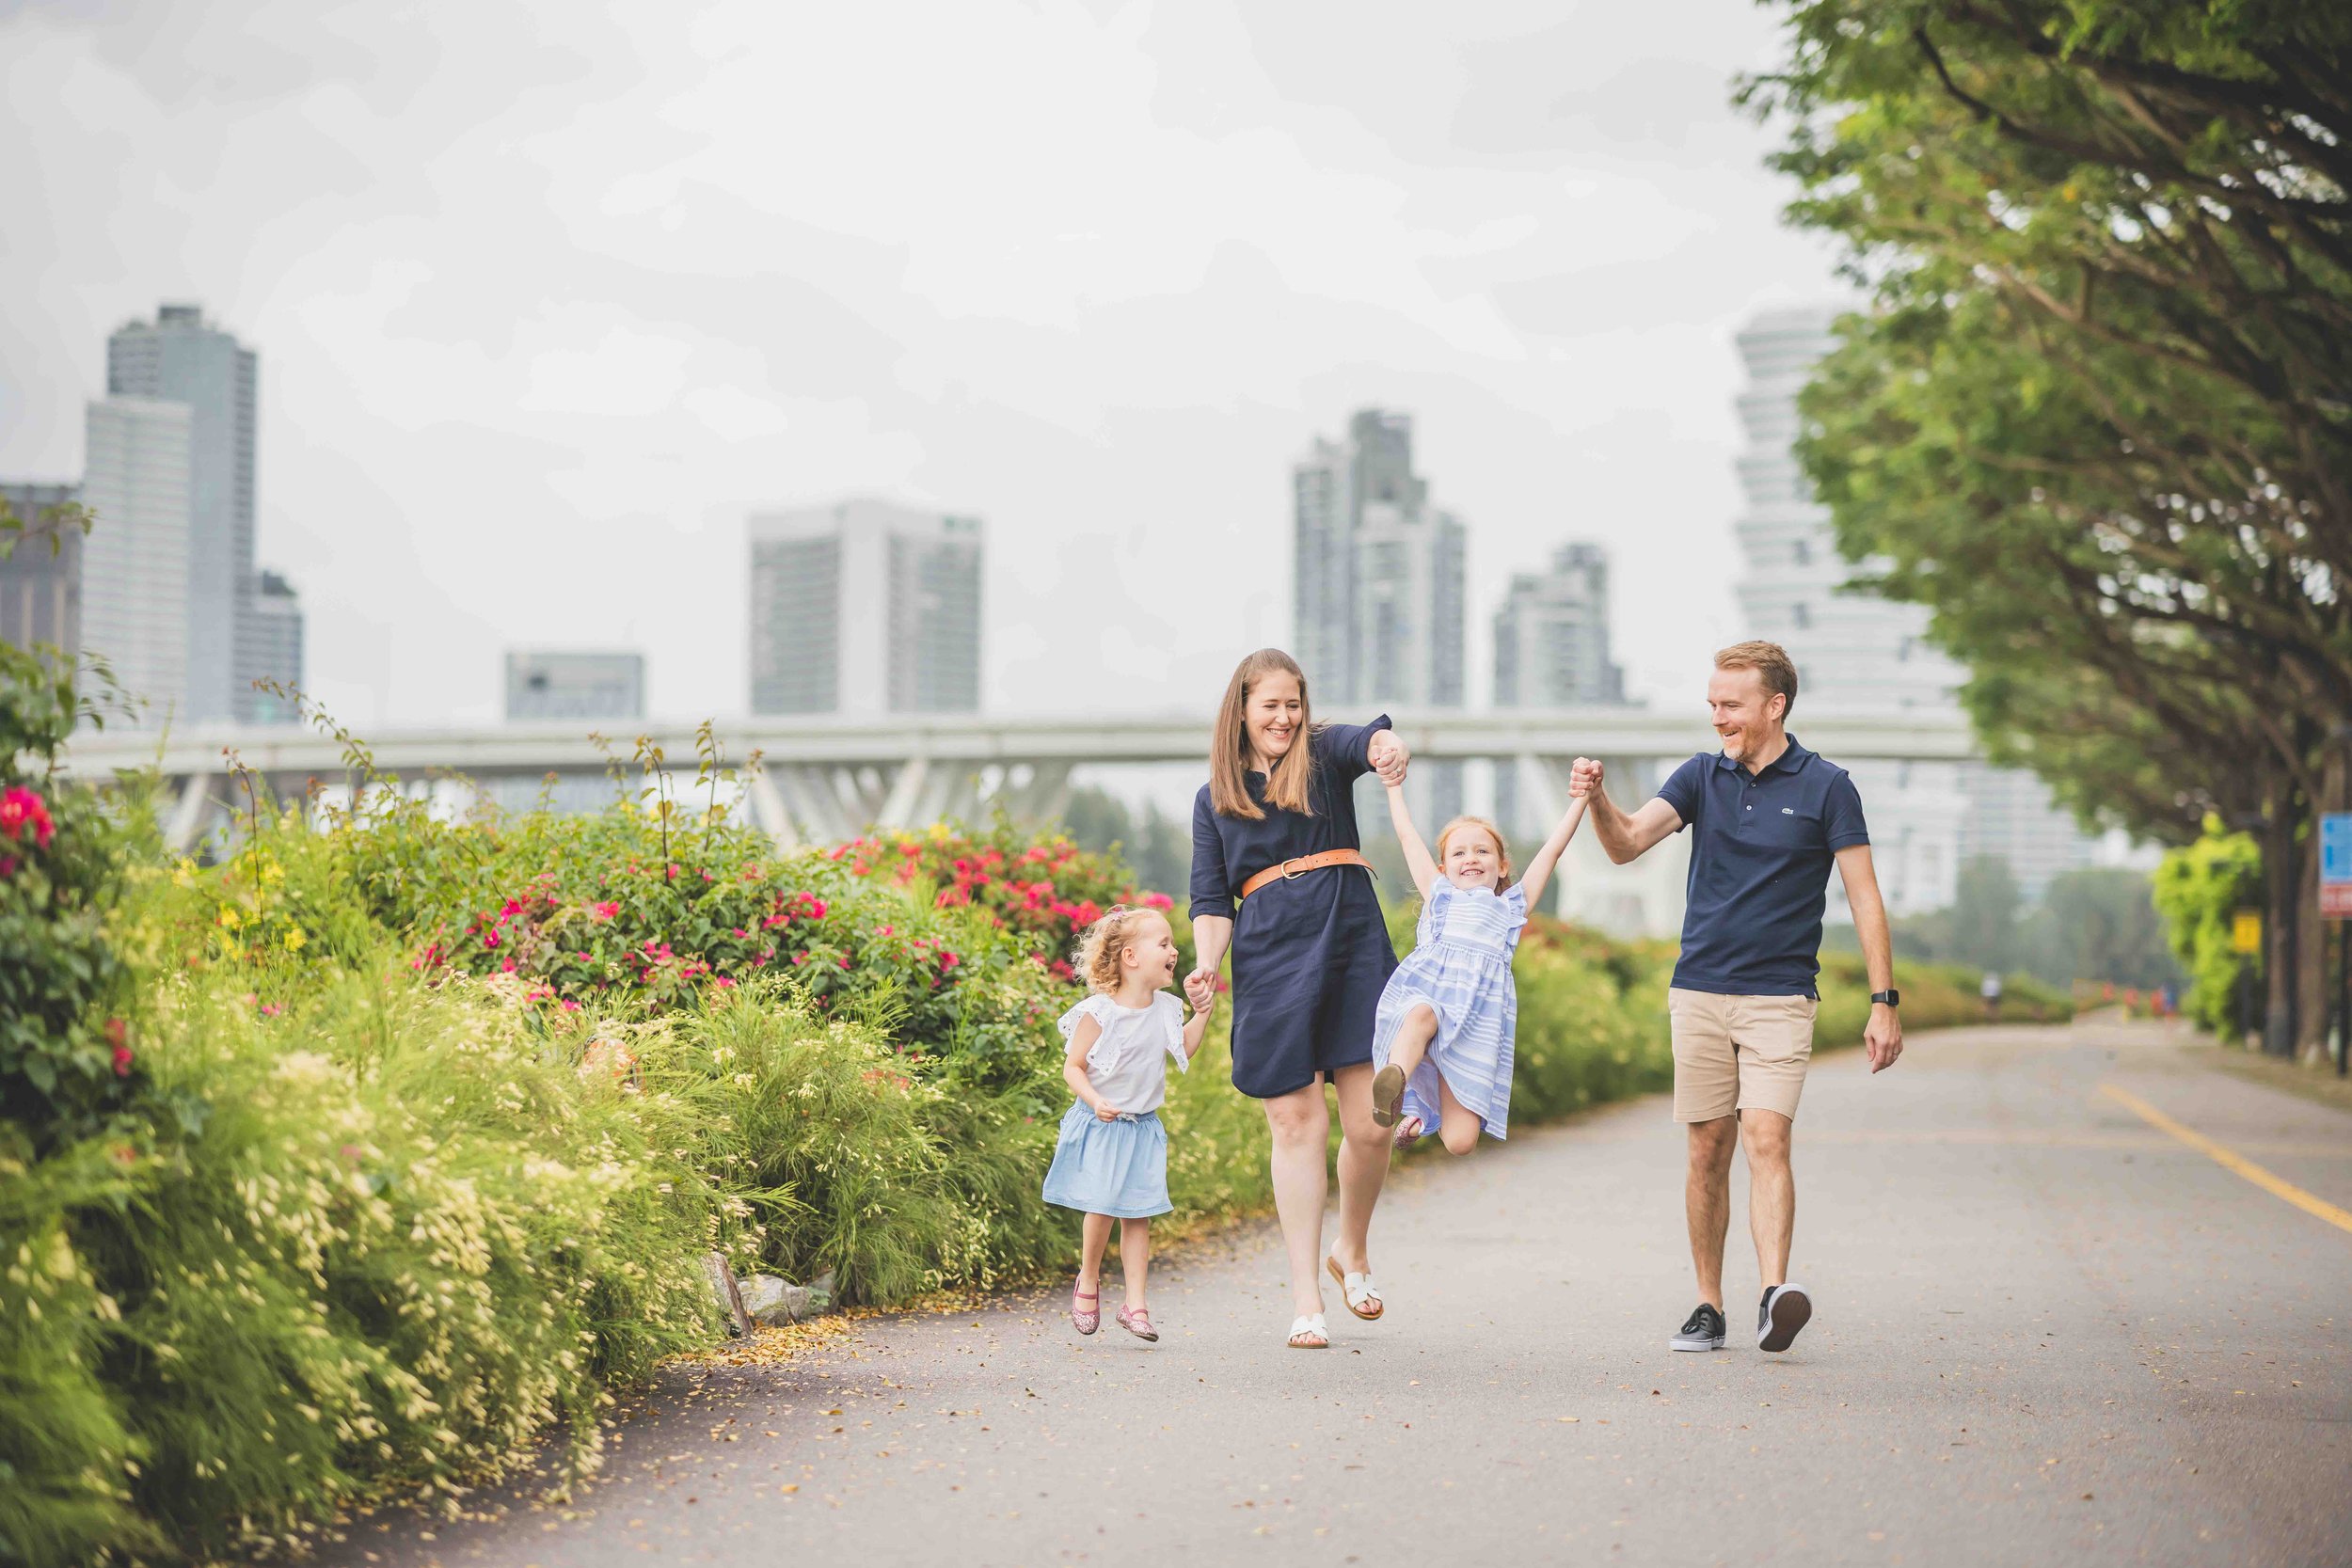 Gardens by the bay east outdoor family shoot-4557.jpg